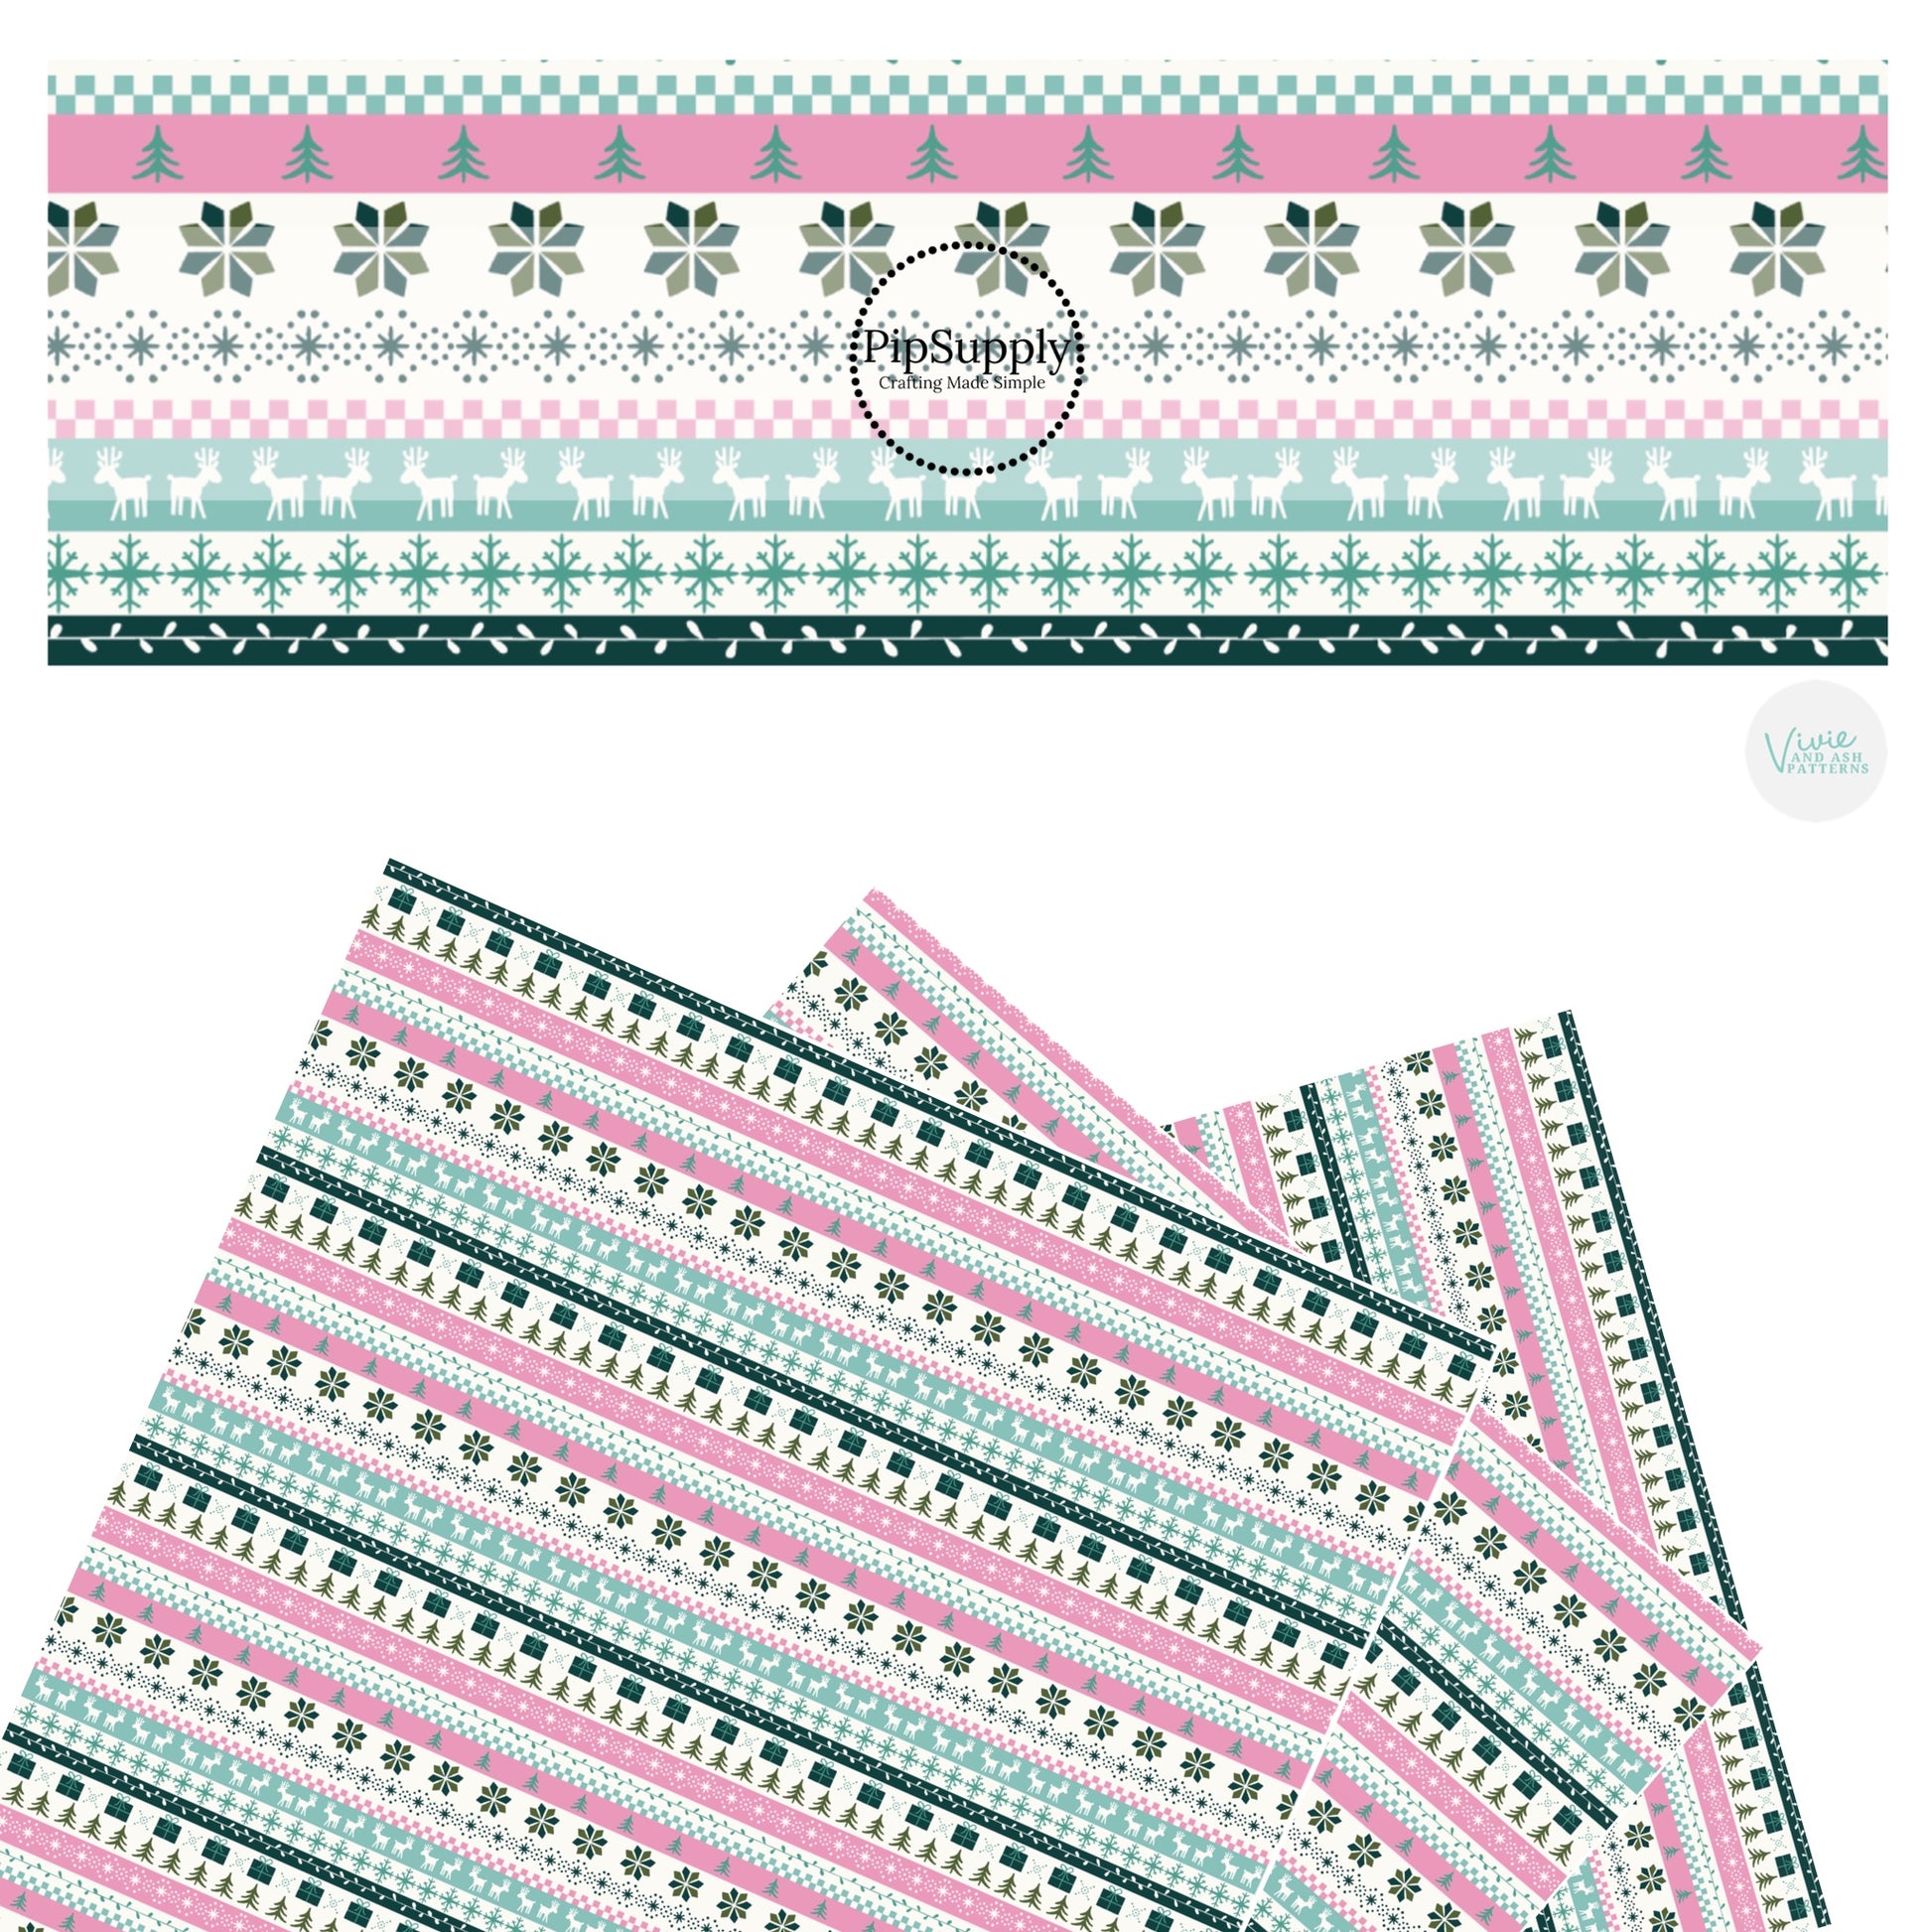 Snowflakes, deer, trees, lights, and checkered on stripe sweater pattern faux leather sheets